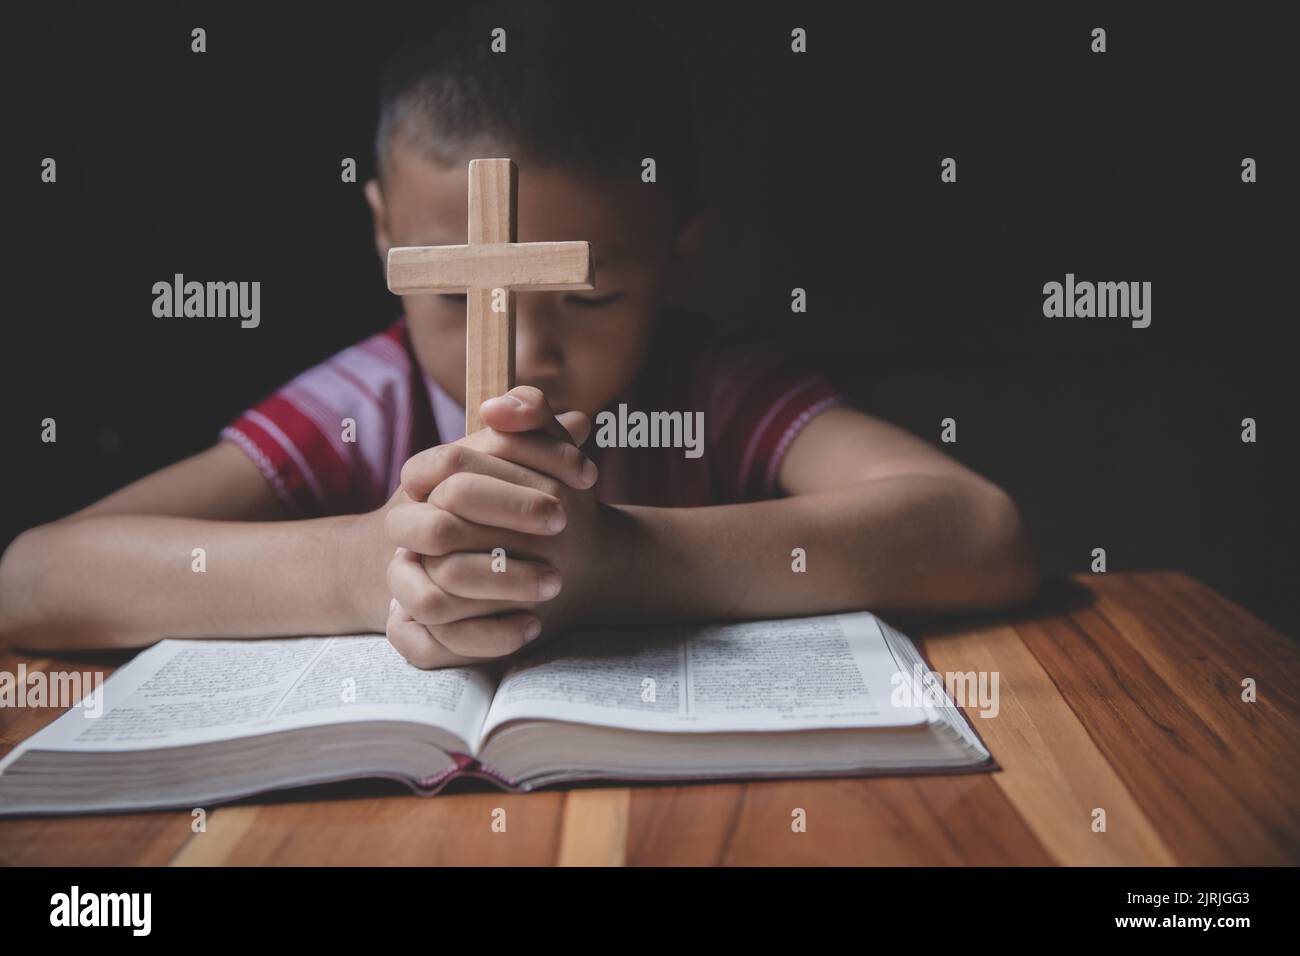 Boy hands holding a holy cross and praying to God, Child Praying for God Religion. Stock Photo